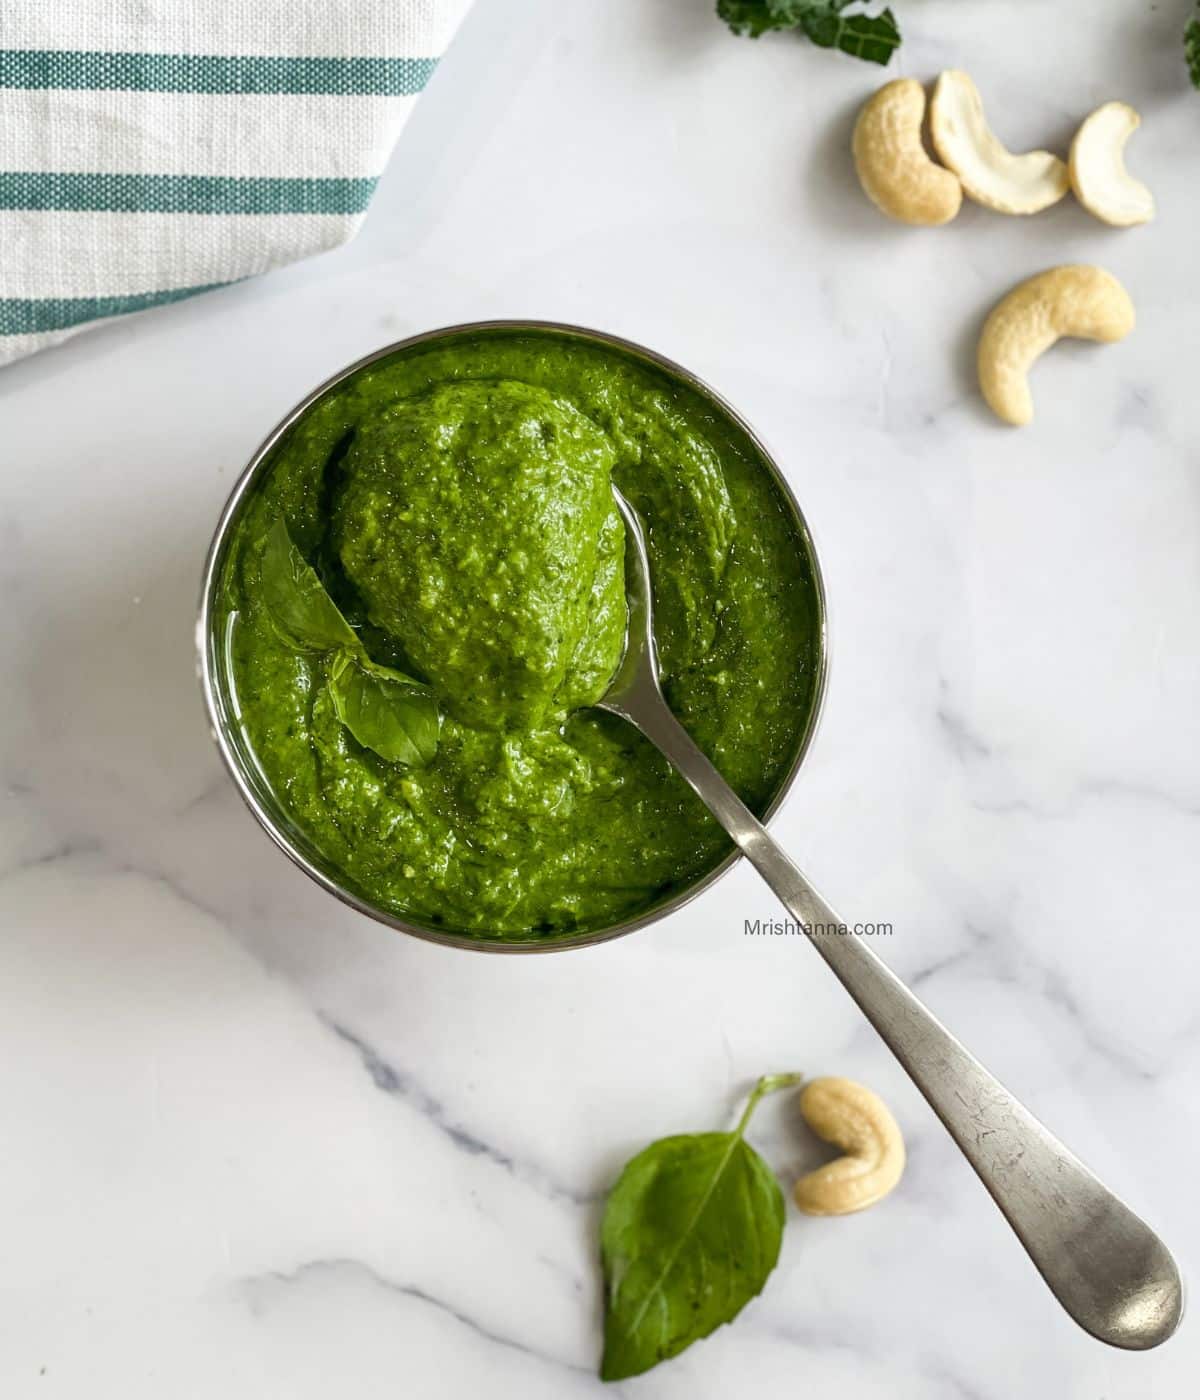 A soon of kale cashew pesto is placed on the bowl.